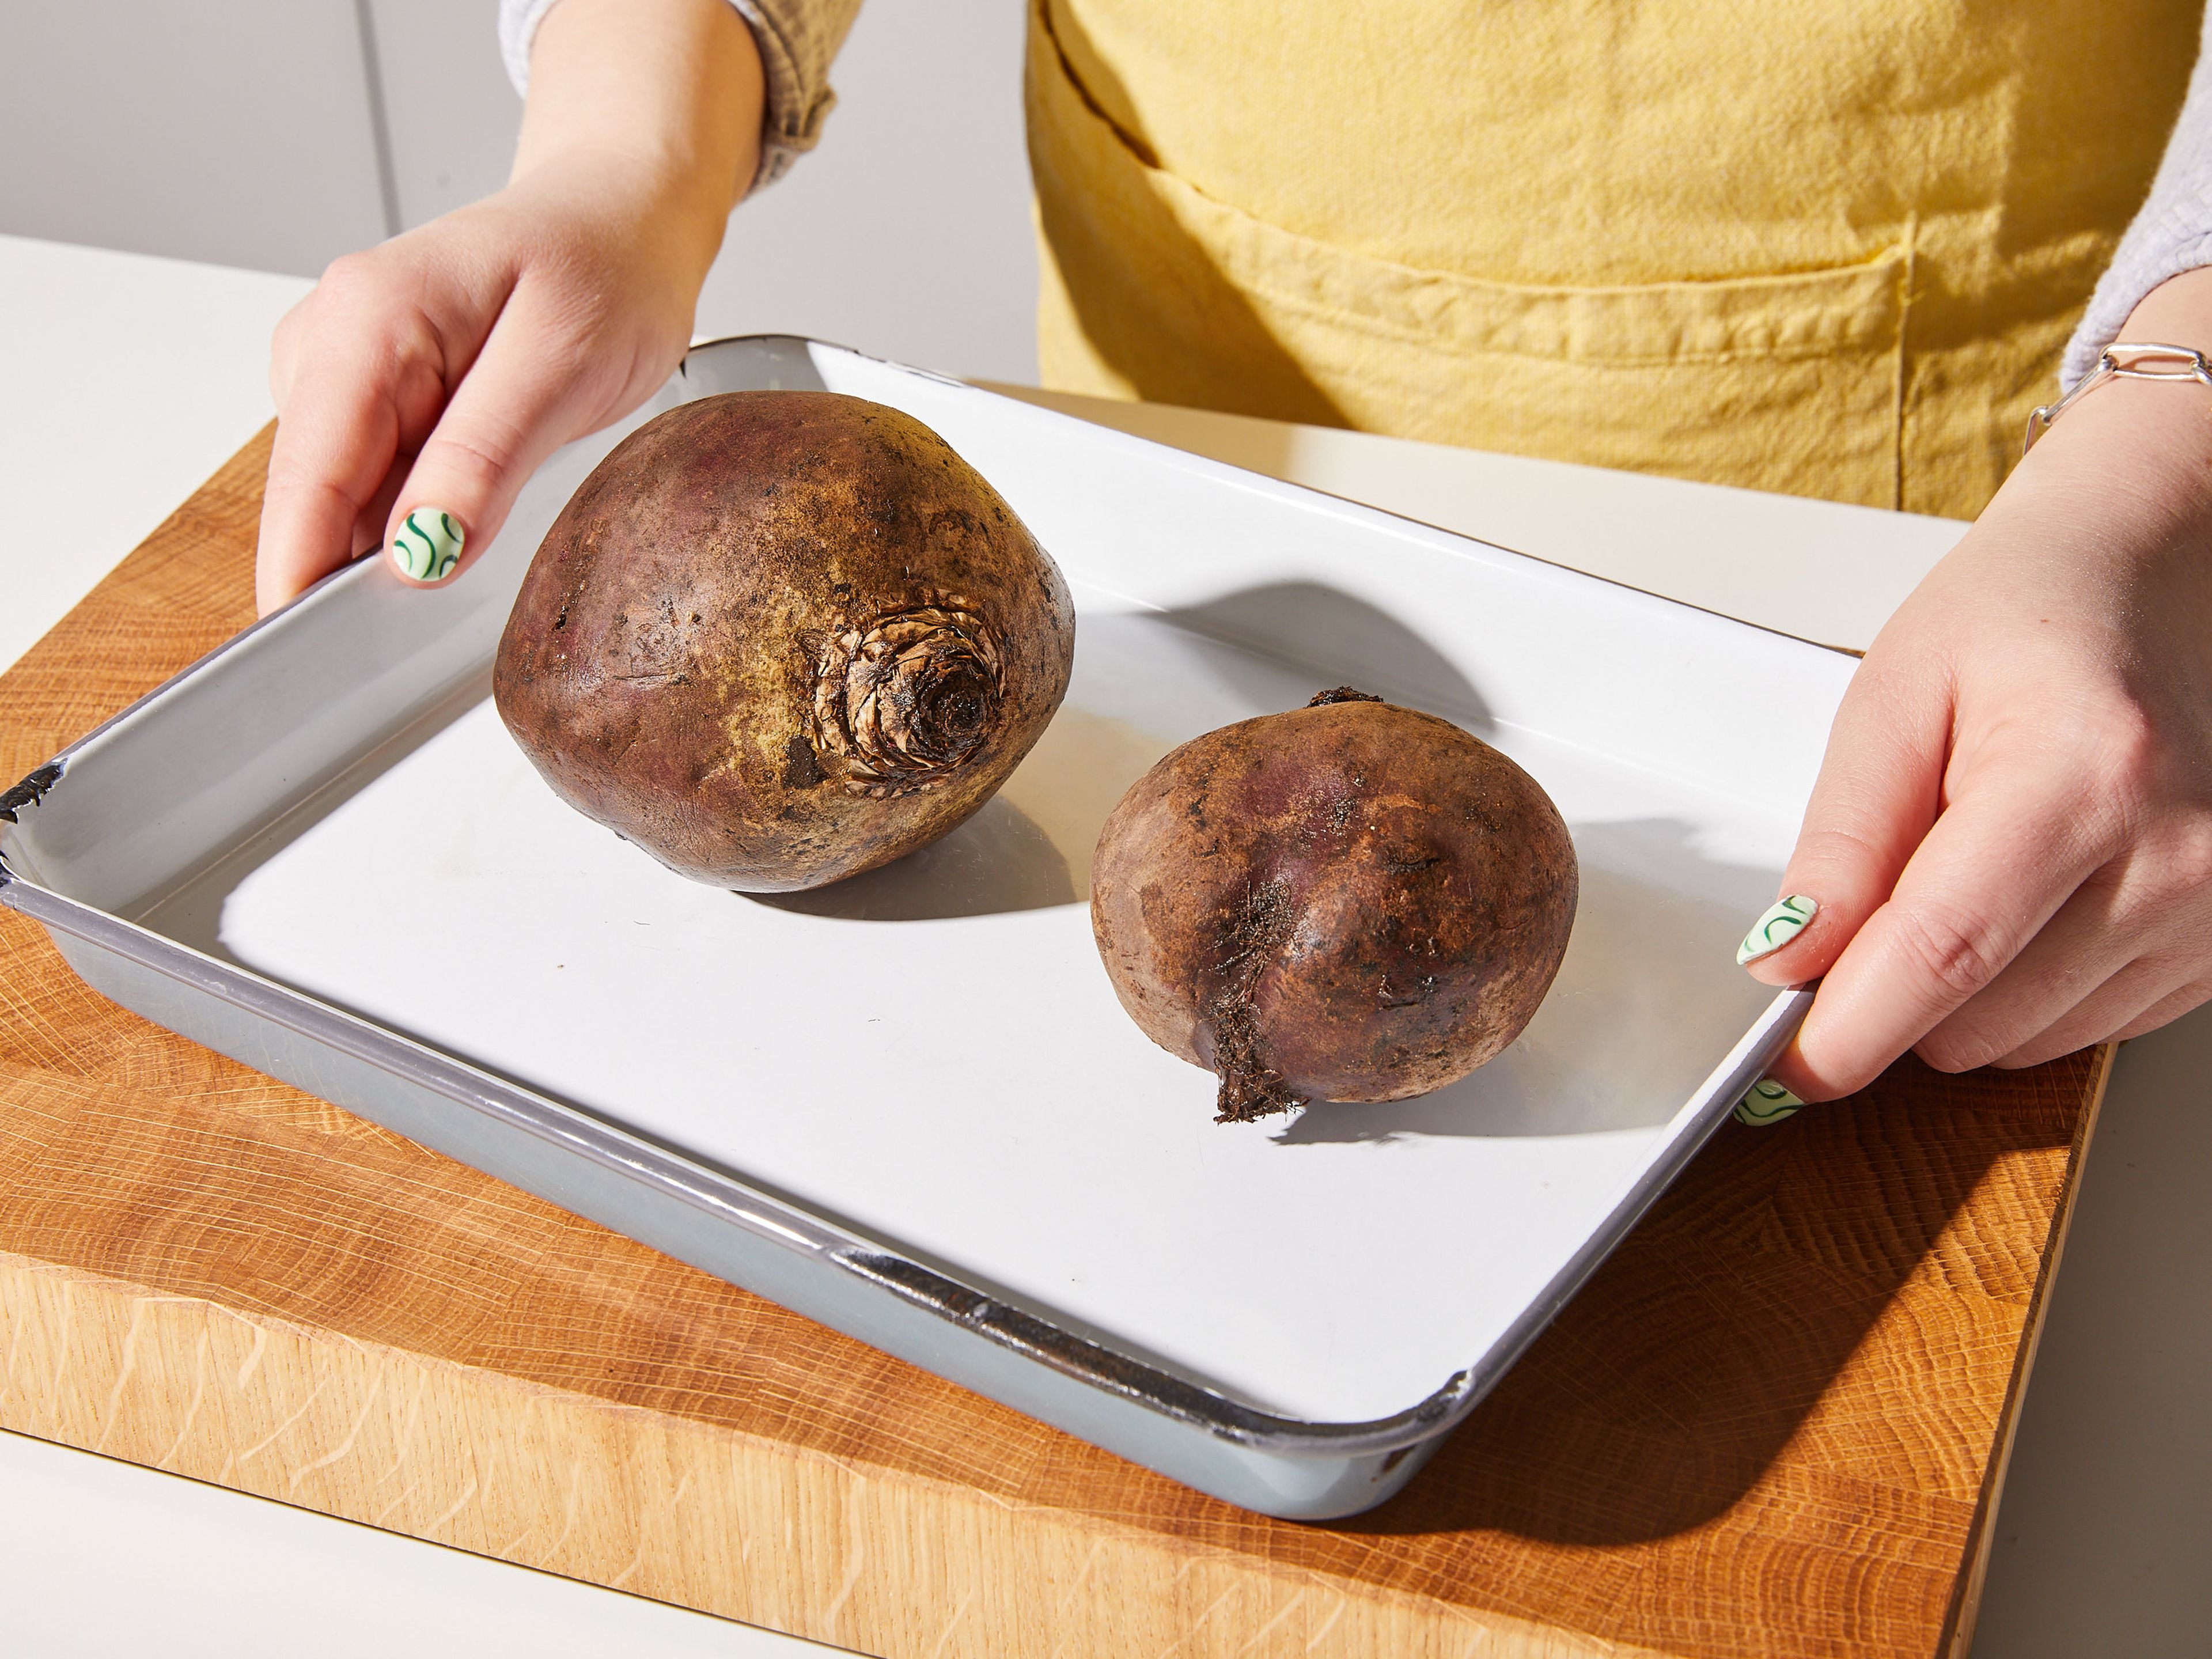 Preheat oven to 200°C/390°F. Place beet with skin on a baking tray, transfer to the oven and bake for approx. 40 min.